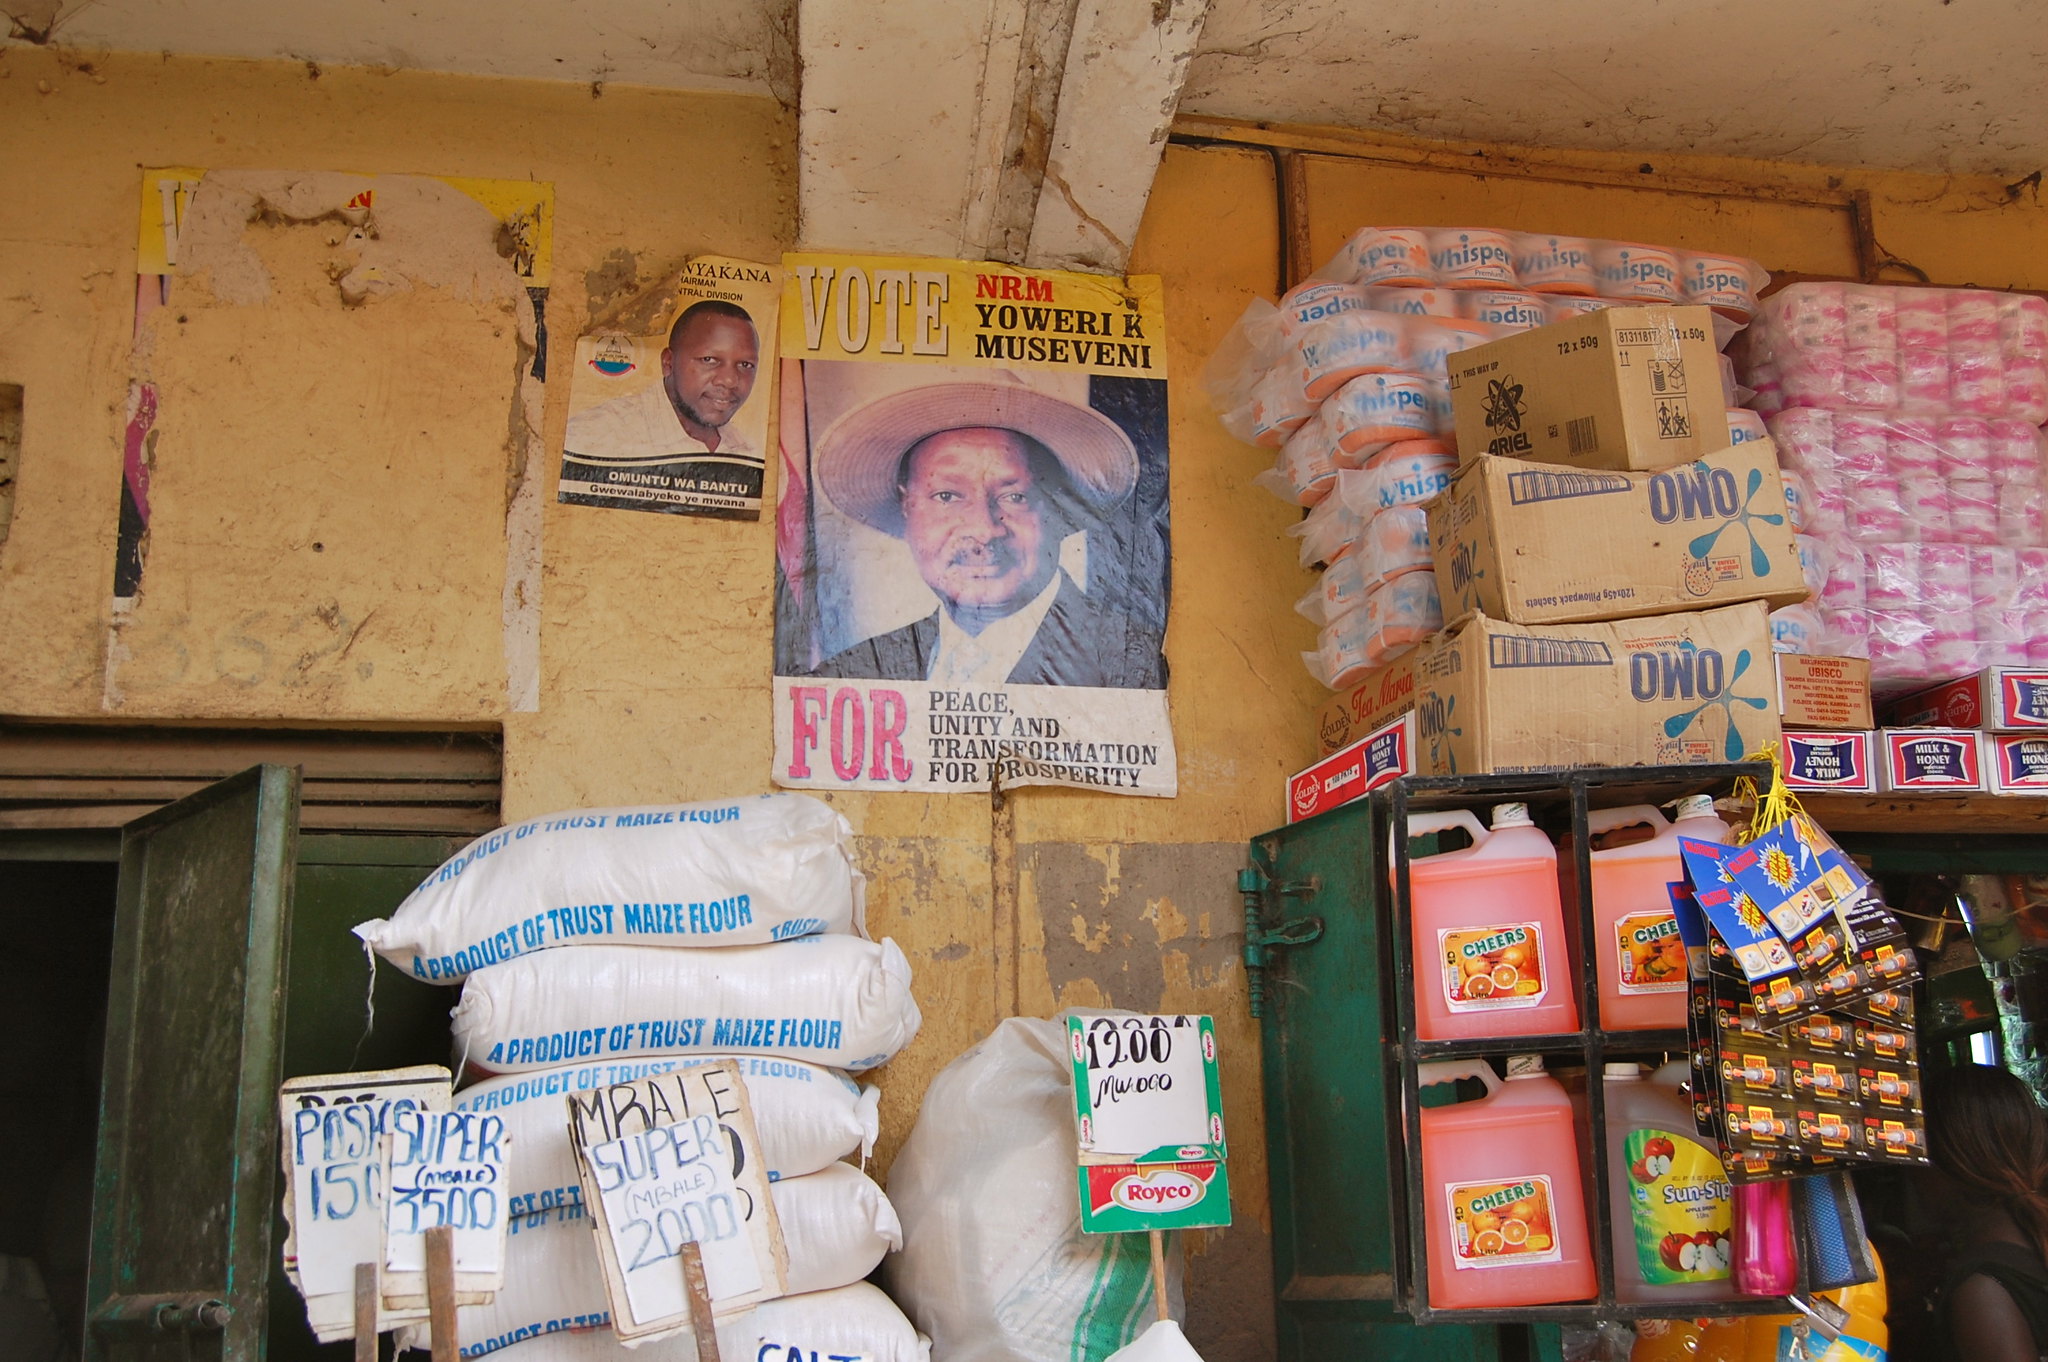 Rural shop with election poster. Photo by Gloria via Flickr CC BY-NC 2.0